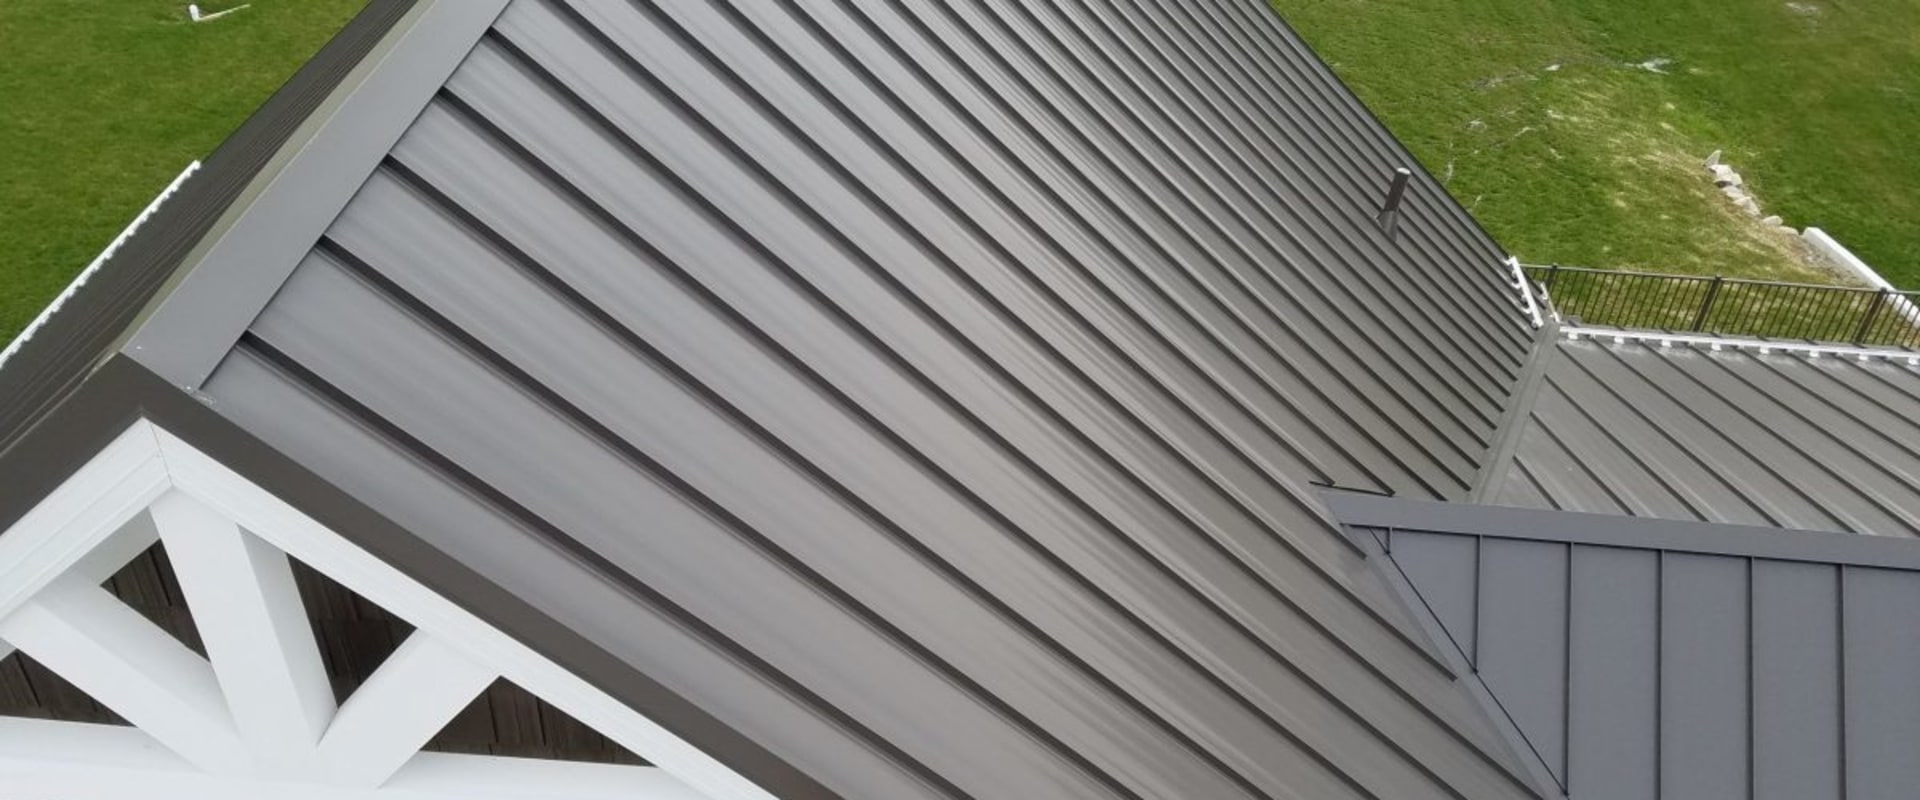 The Benefits Of Metal Roofing For Construction Engineering In Knoxville, TN